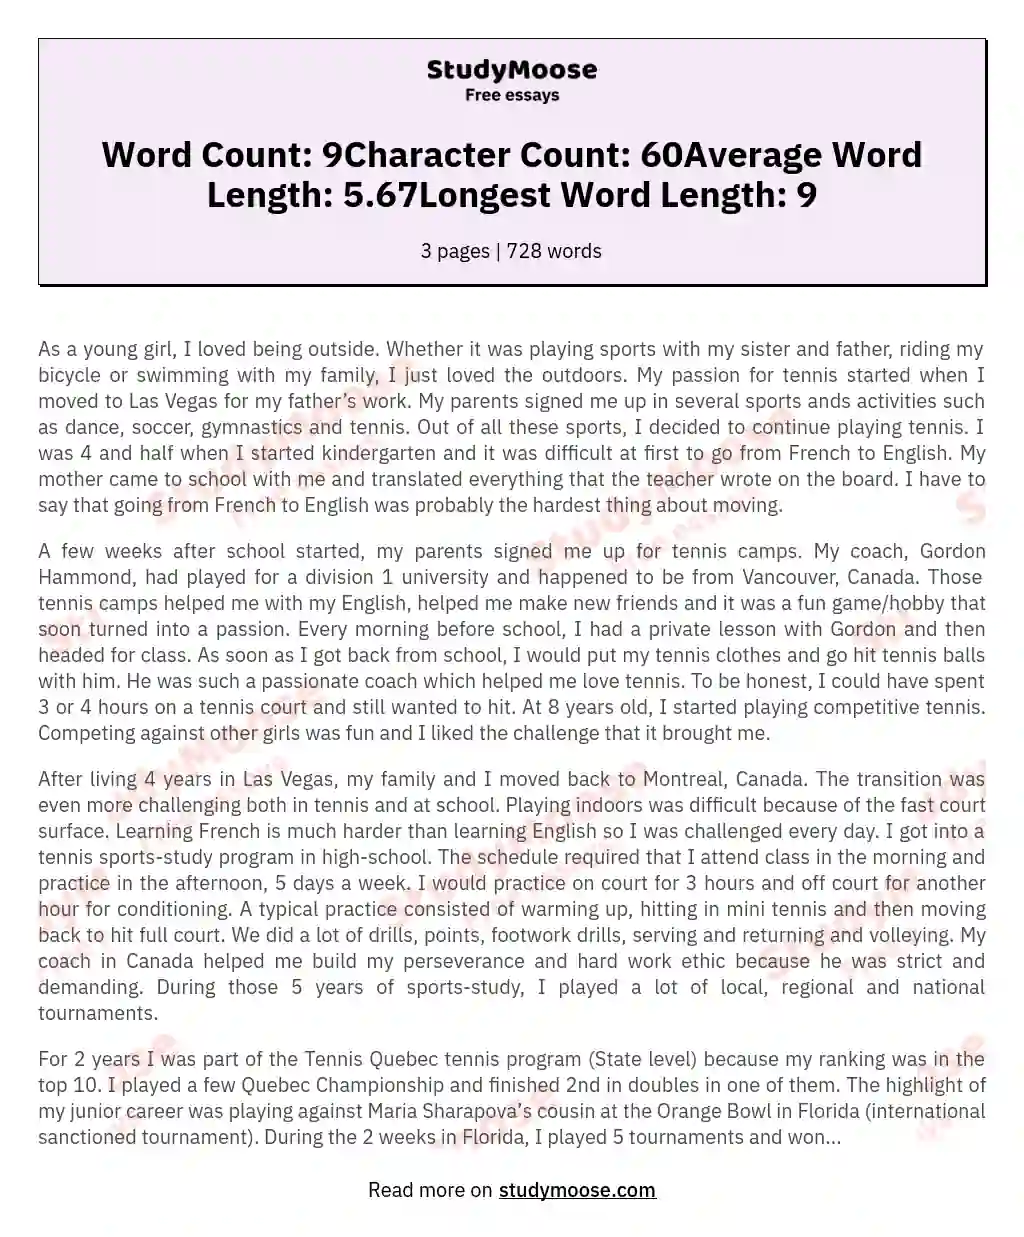 Word Count: 9Character Count: 60Average Word Length: 5.67Longest Word Length: 9 essay